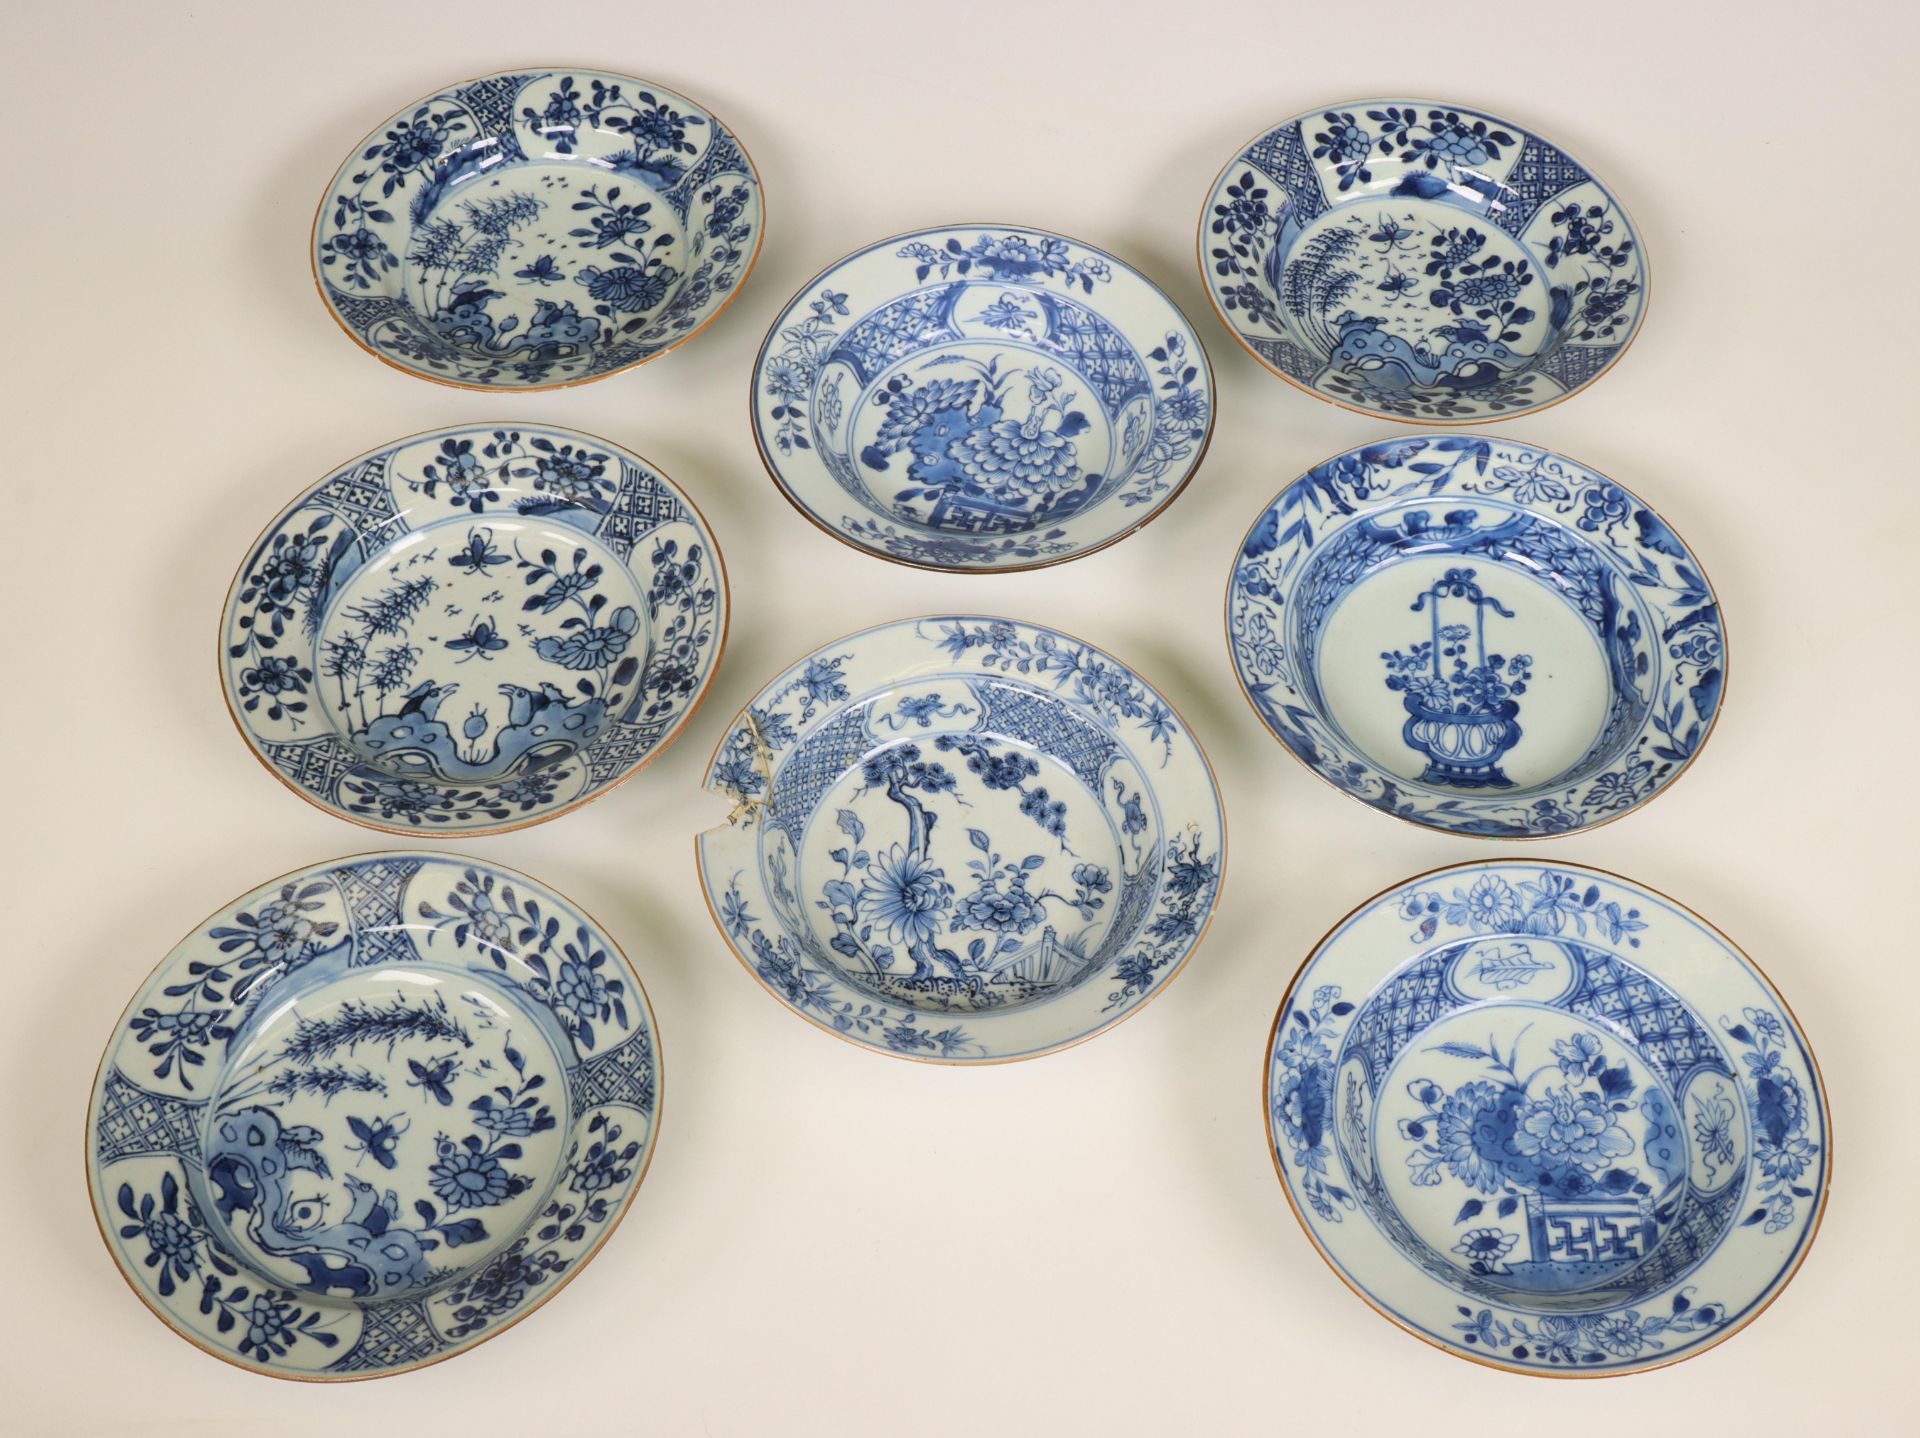 China, eight blue and white porcelain deep saucer dishes, late 18th century, - Image 2 of 2